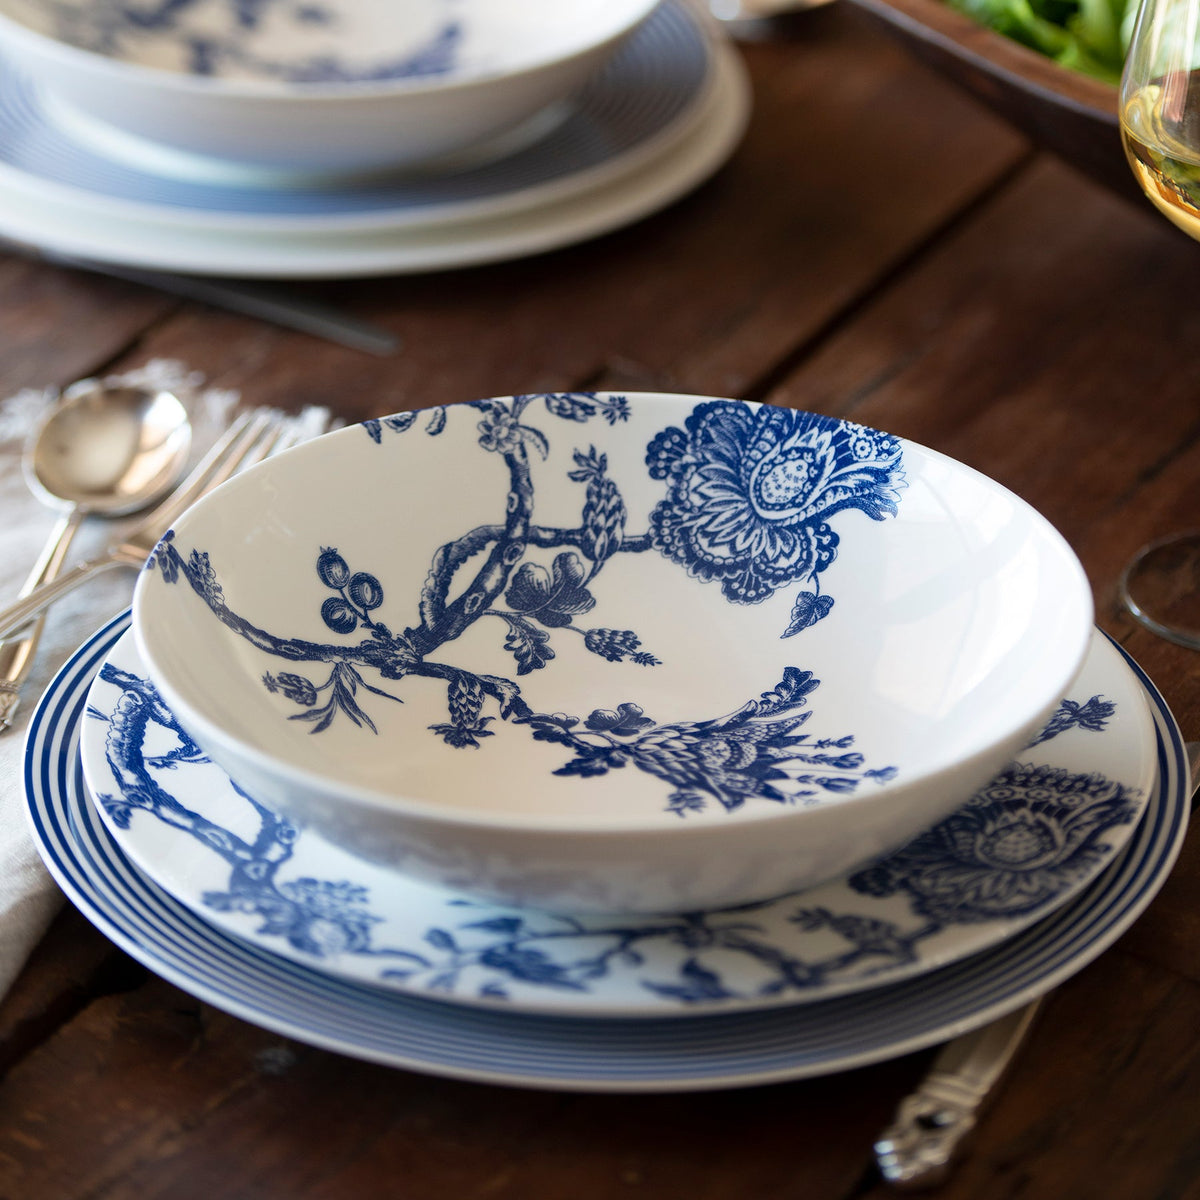 The blue and white Arcadia Coupe Soup Bowl by Caskata sits atop a Newport stripe charger plate and Arcadia dinner plate on a rustic dinner table.